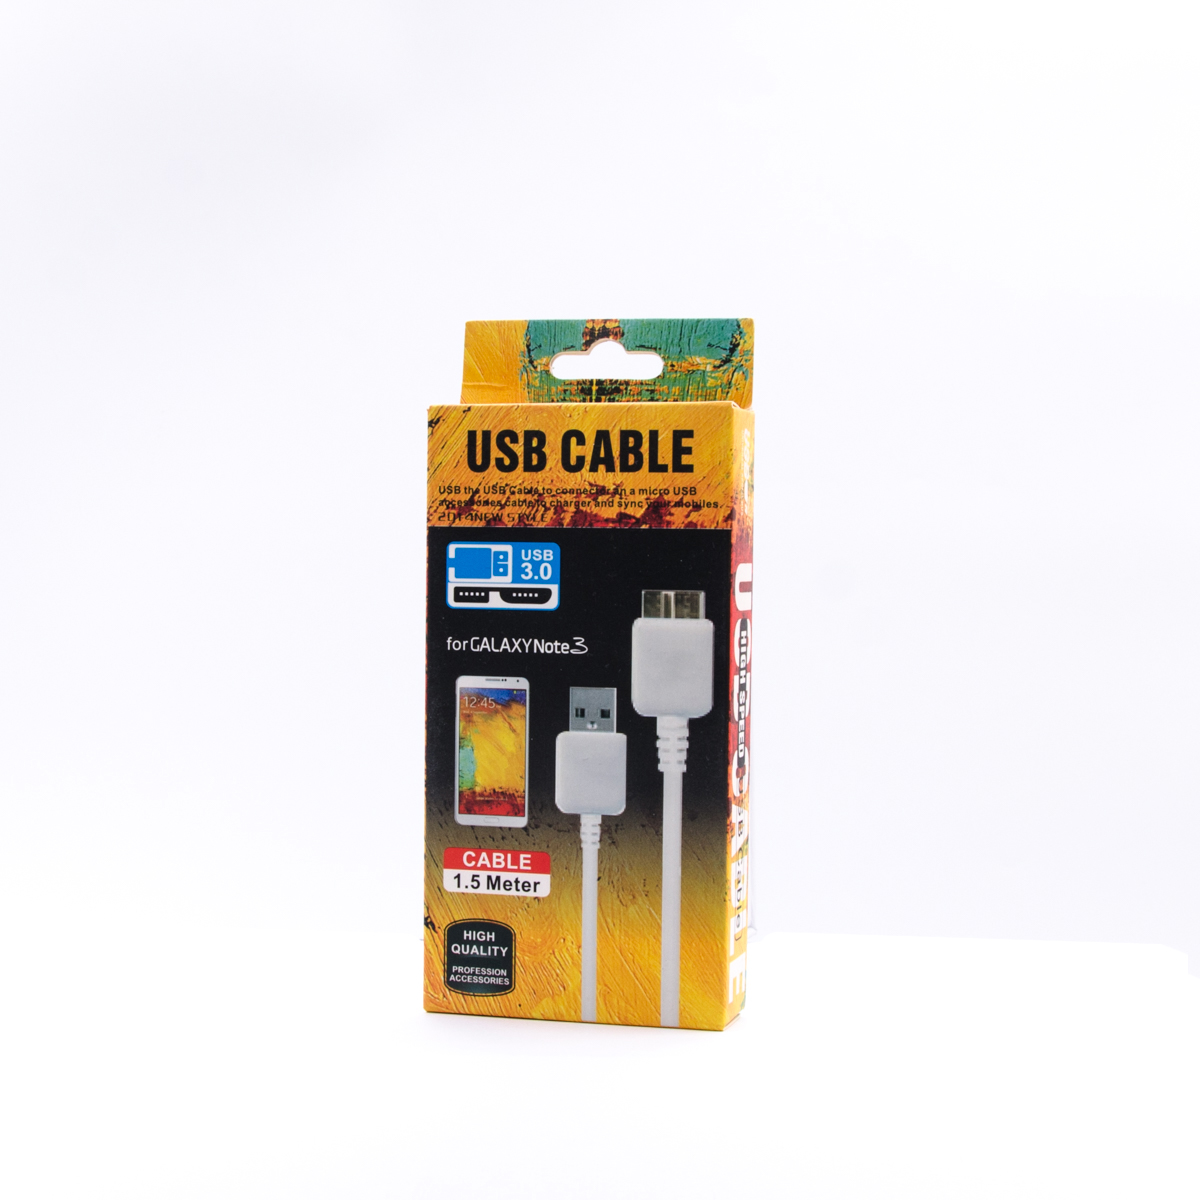 Usb data cable for n9000 (galaxy note 3)